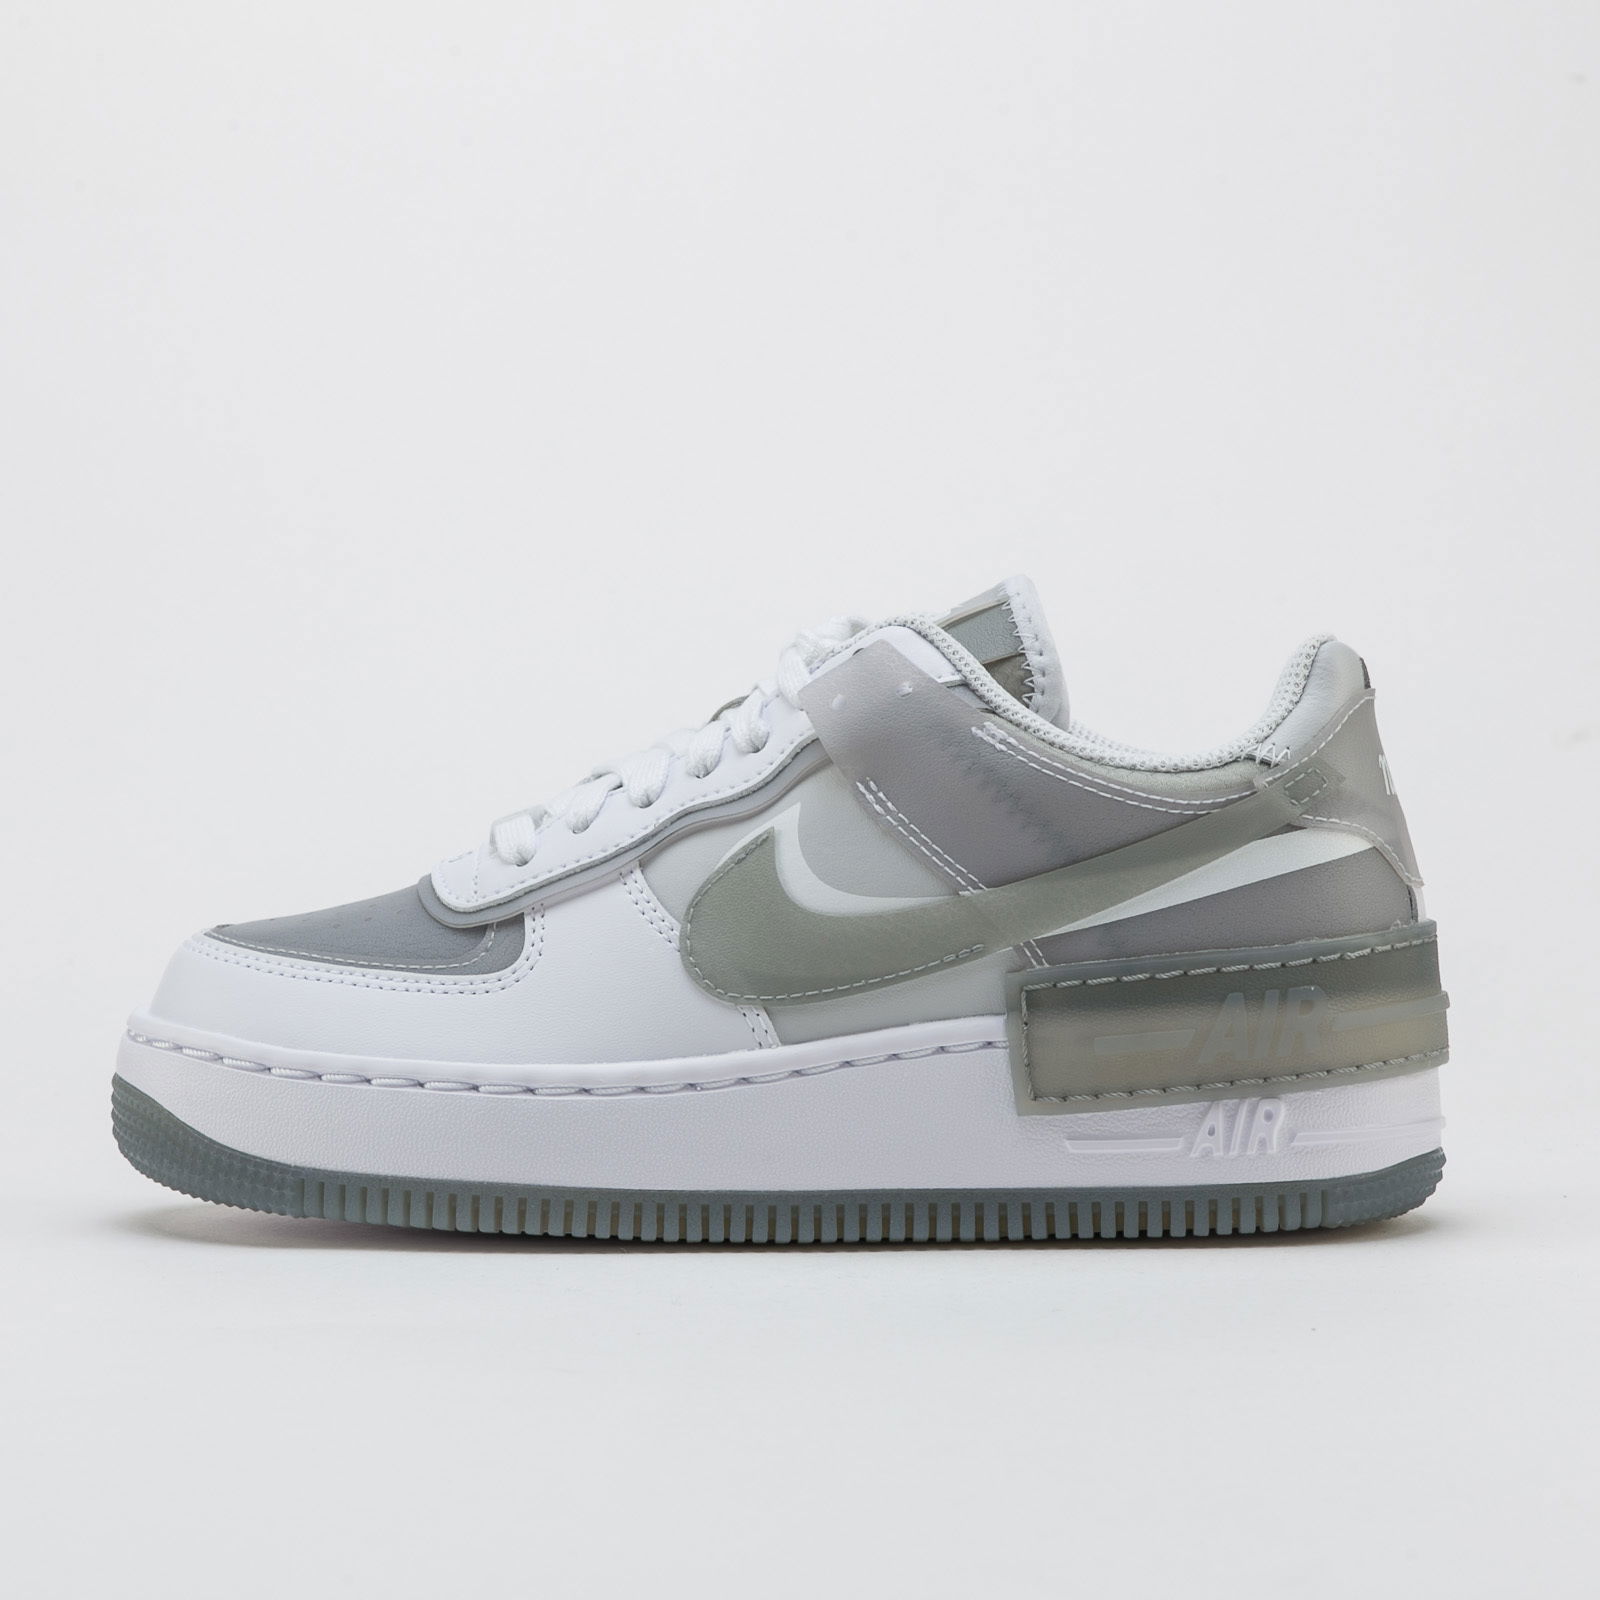 Air Force 1 Shadow SE "Particle Grey" W